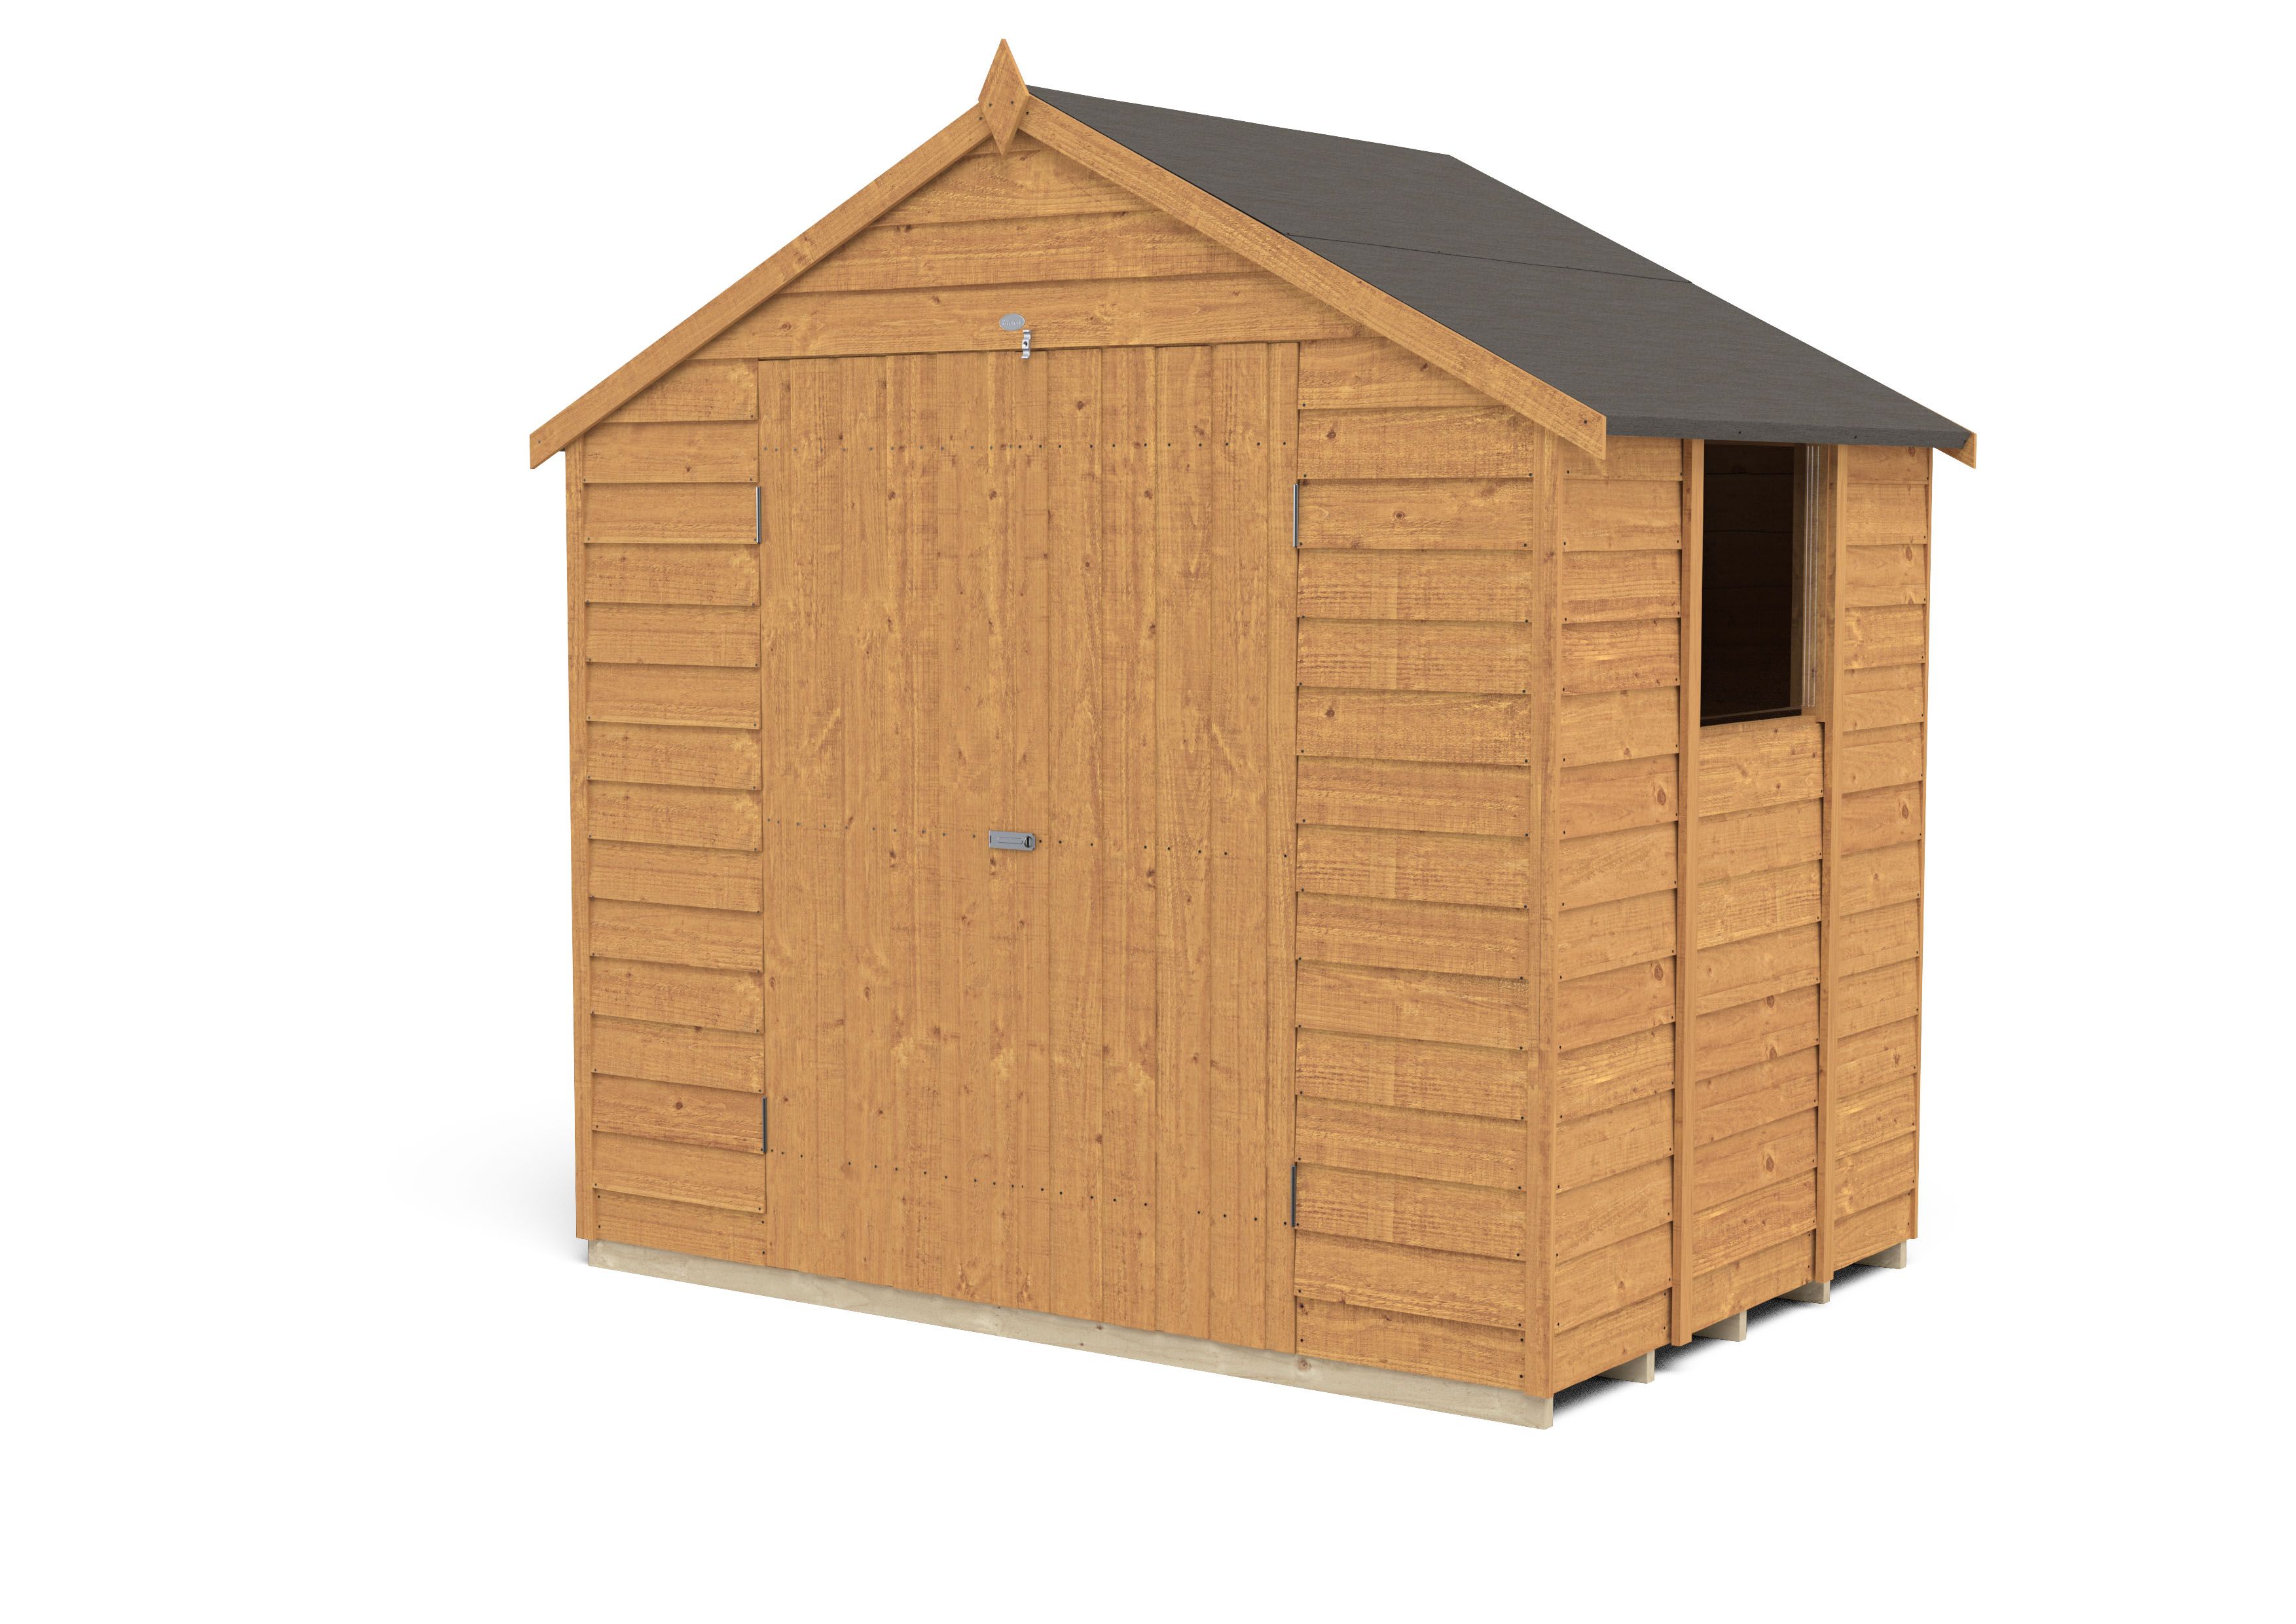 Forest Garden Overlap 7x5 ft Apex Wooden Dip treated 2 door Shed with floor & 1 window (Base included)